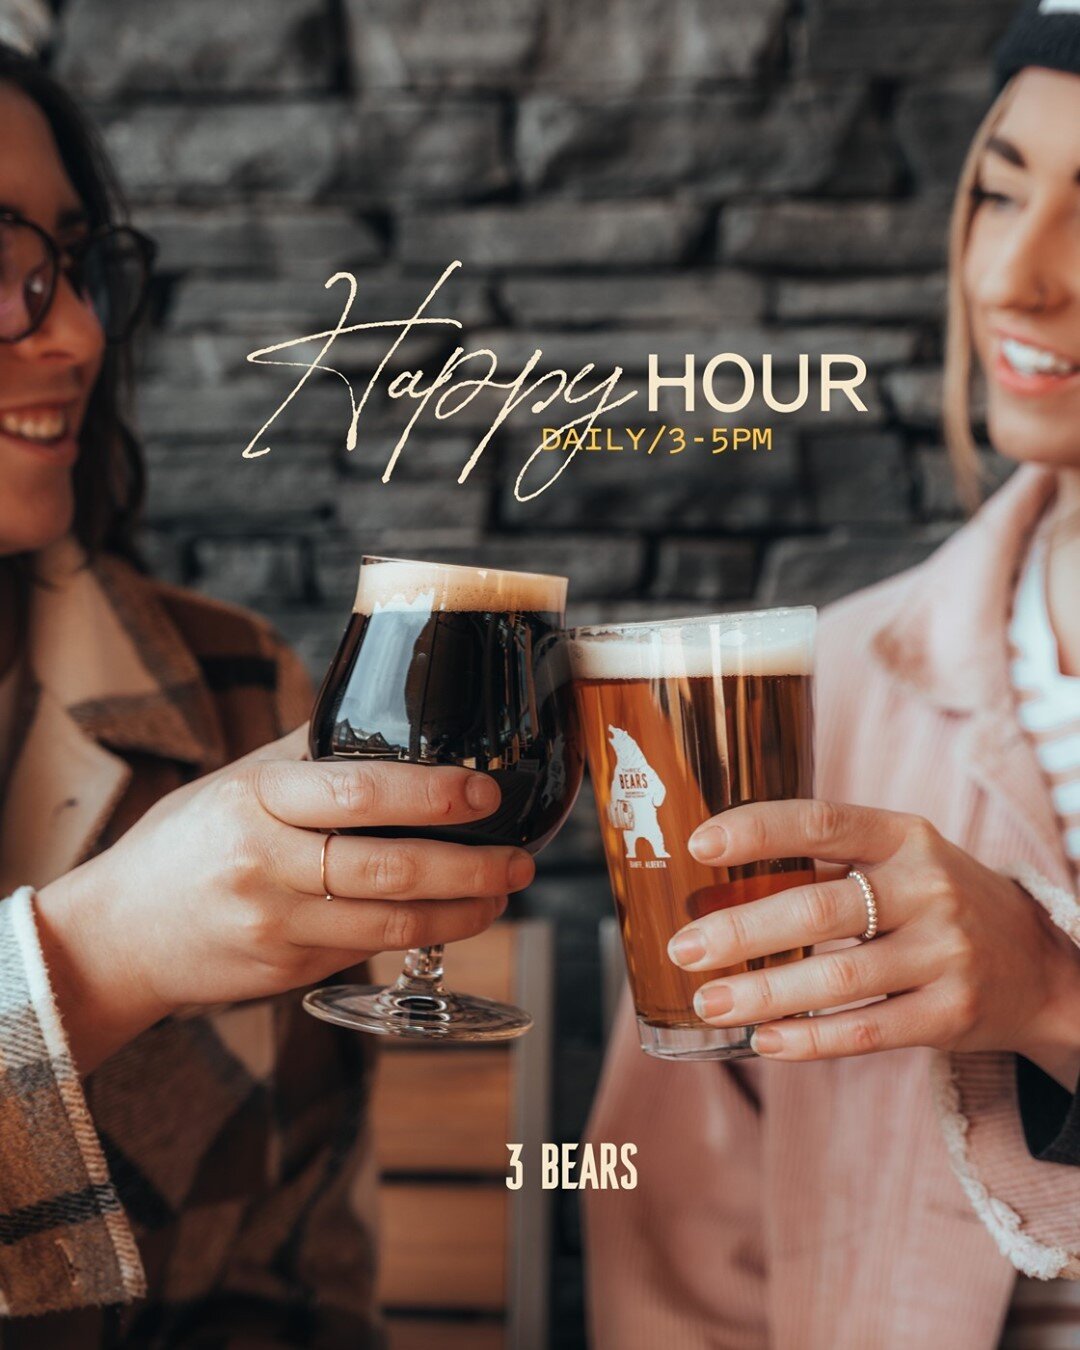 In case you didn't get the memo - Happy Hour is EVERY DAY, 3-5pm. And YES we have SNACKS! 🧸🍺